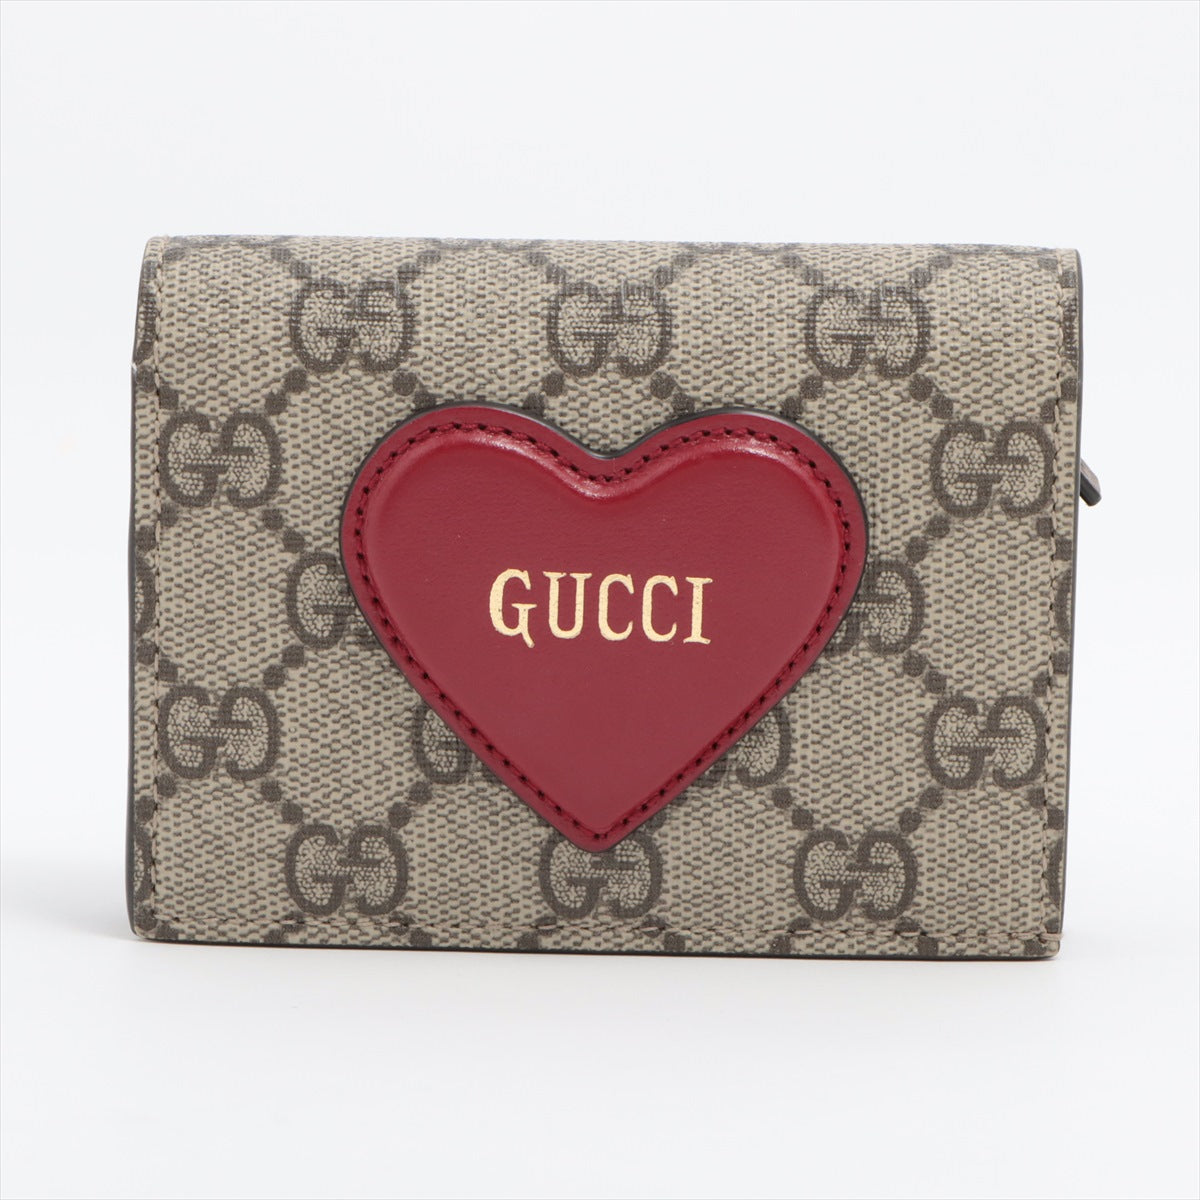 Gucci GG Supreme 648848 PVC & leather Compact Wallet Beige